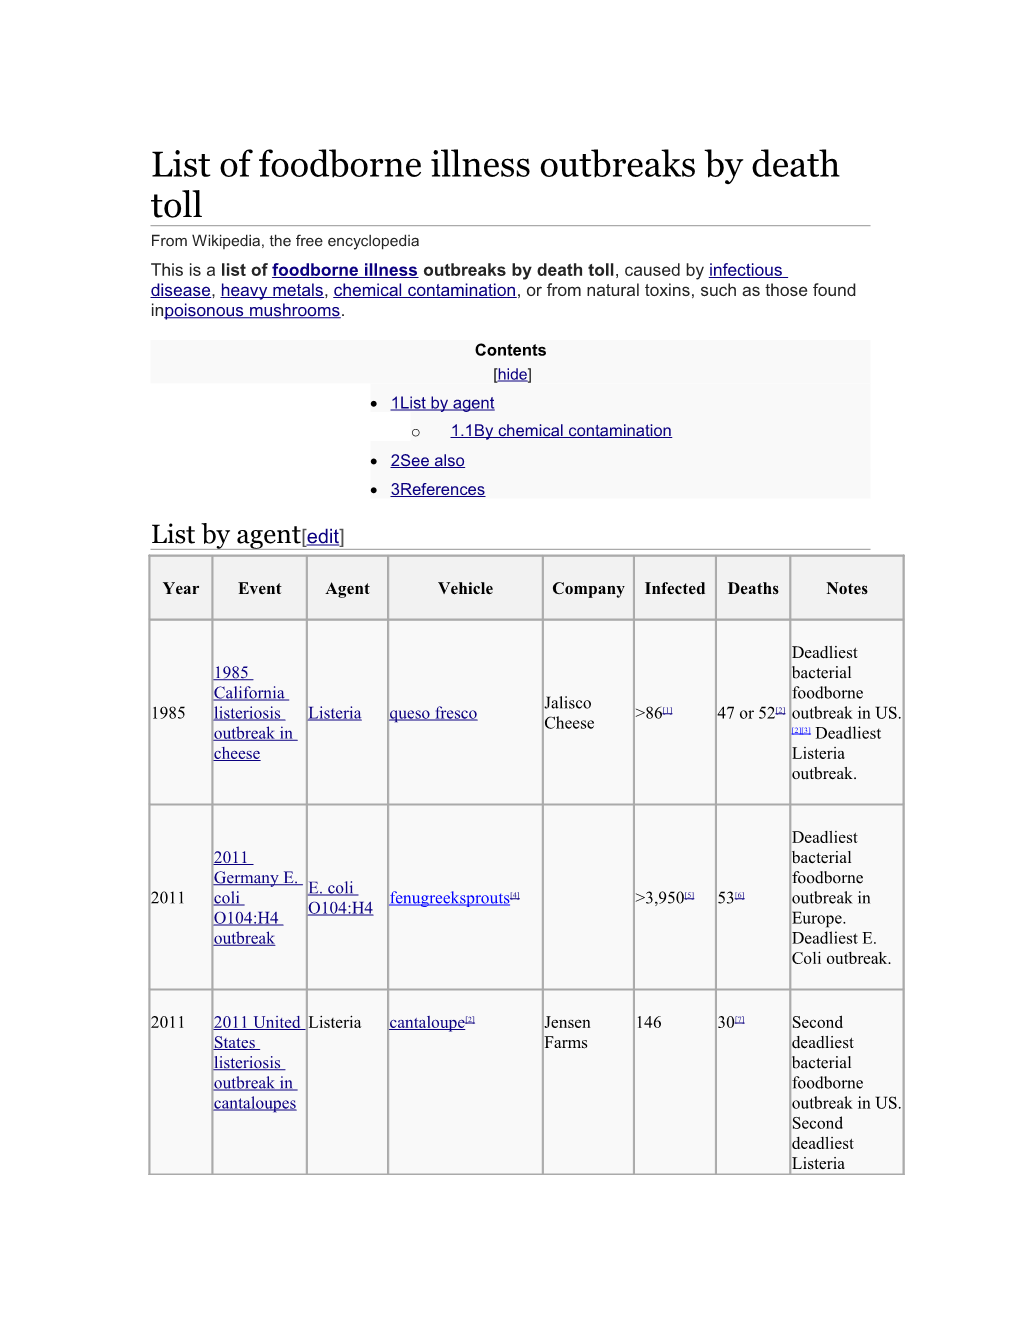 List of Foodborne Illness Outbreaks by Death Toll